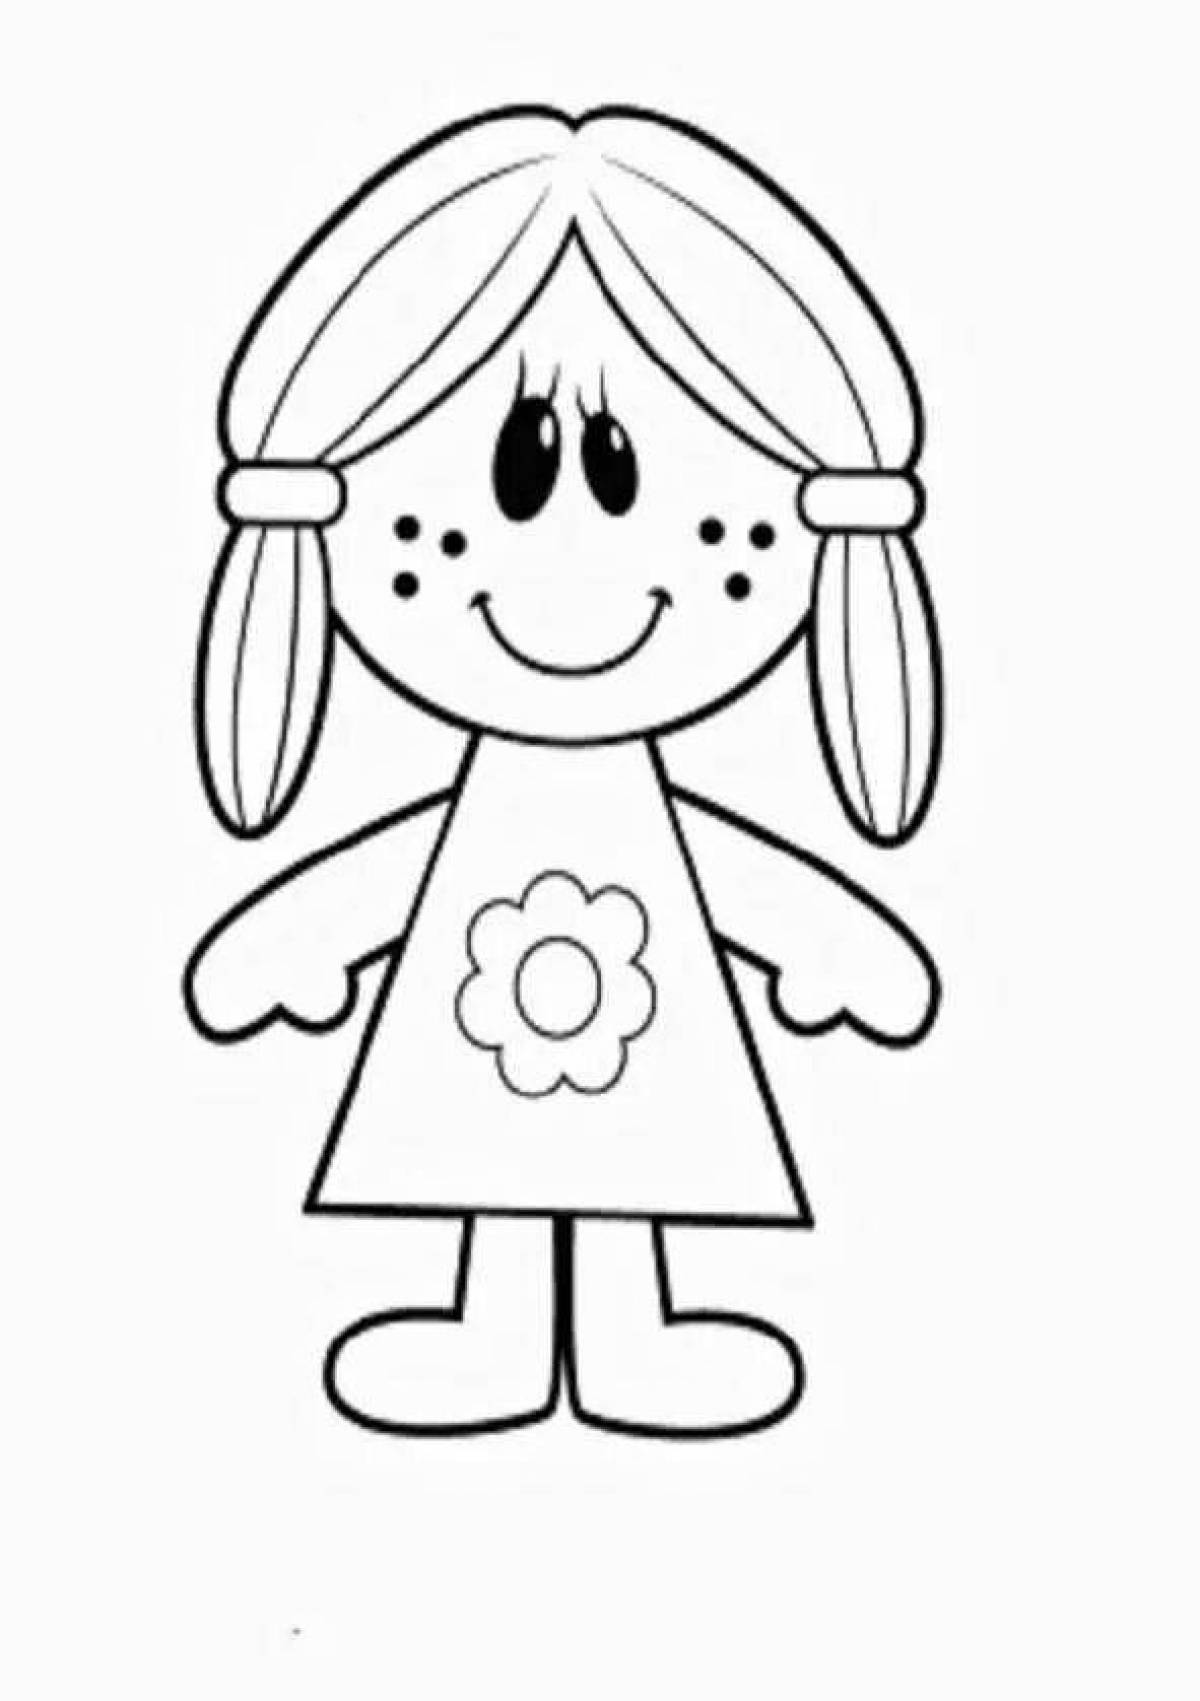 Creative coloring doll for 3-4 year olds